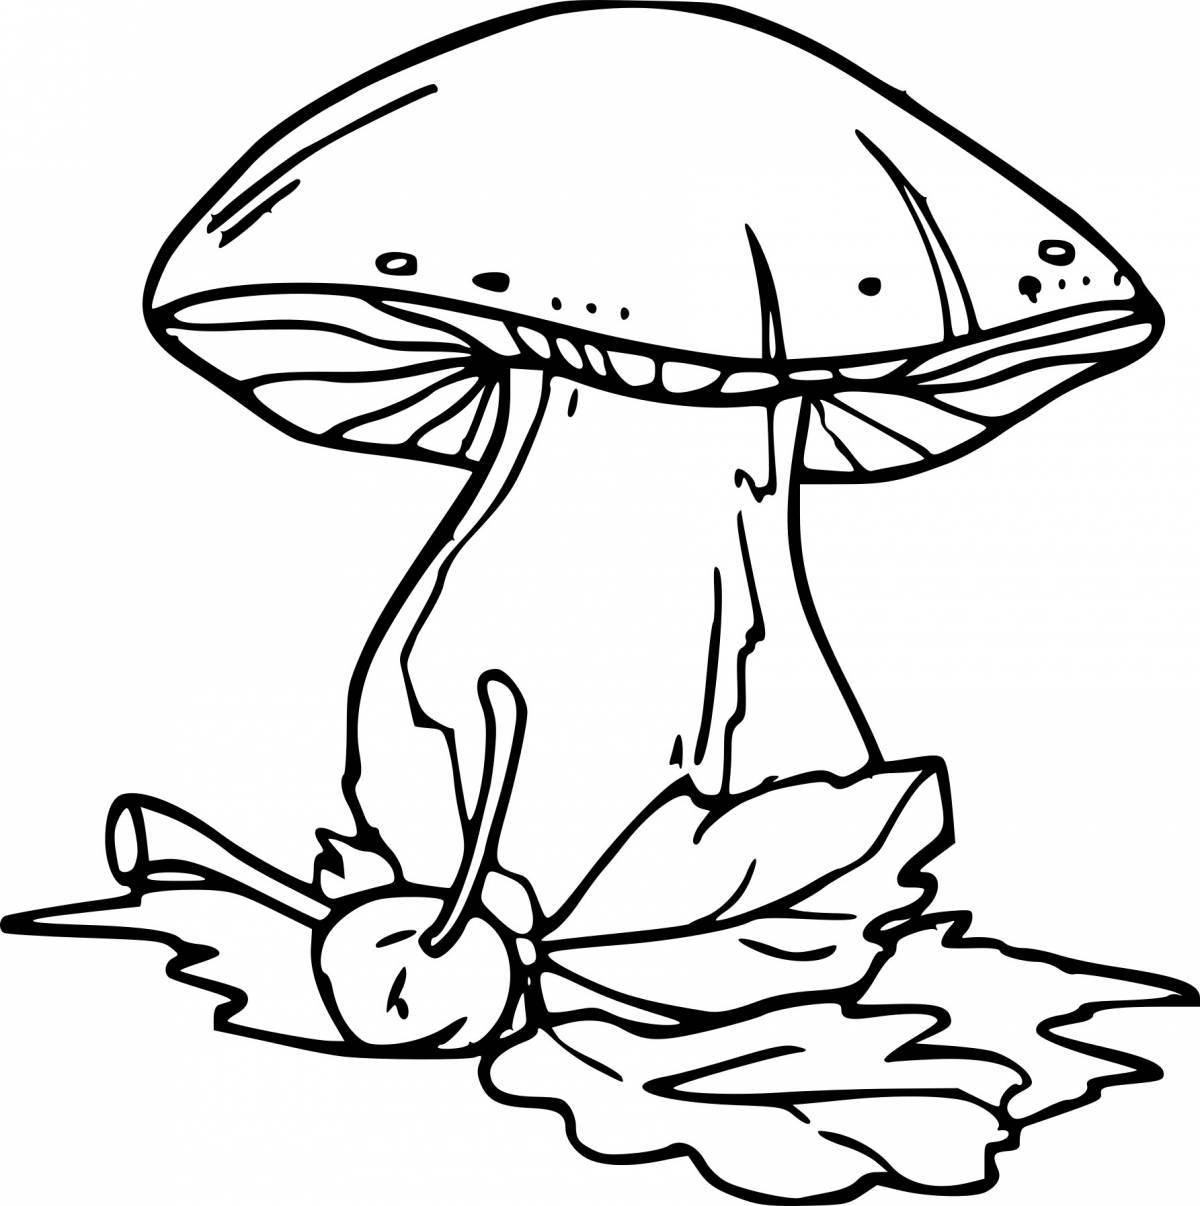 Fun mushroom coloring book for 3-4 year olds